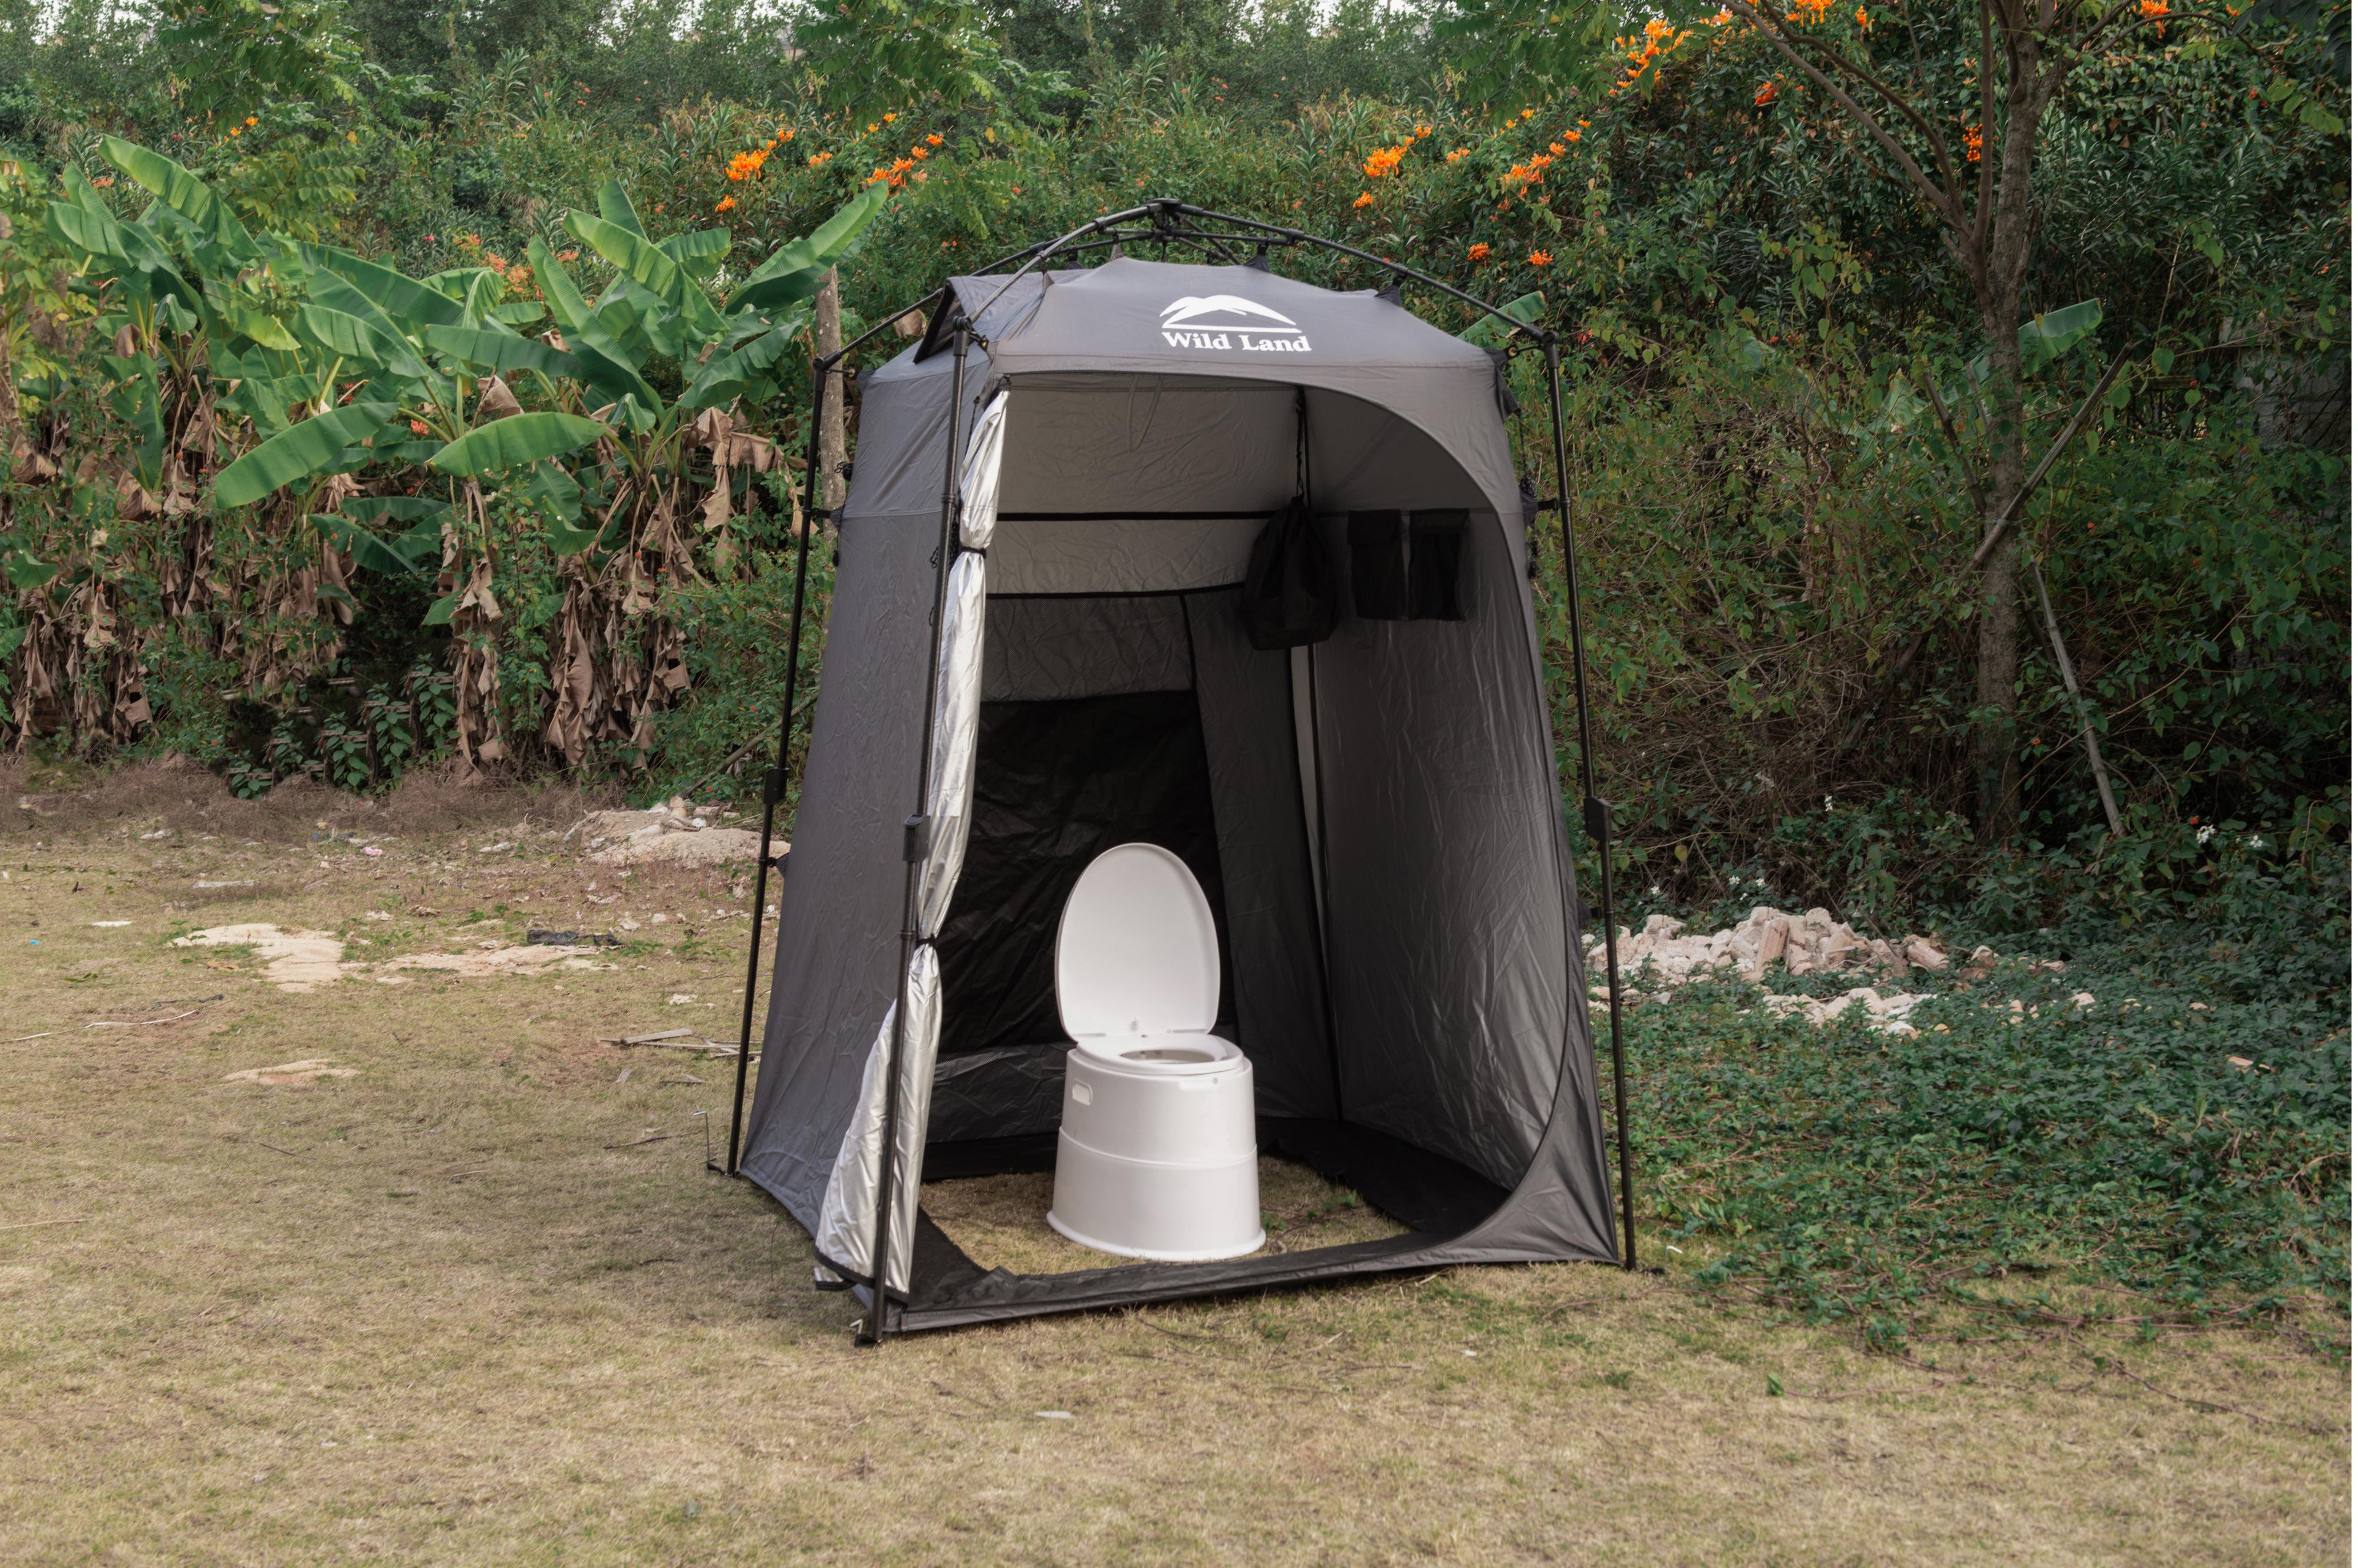 Privacy tent